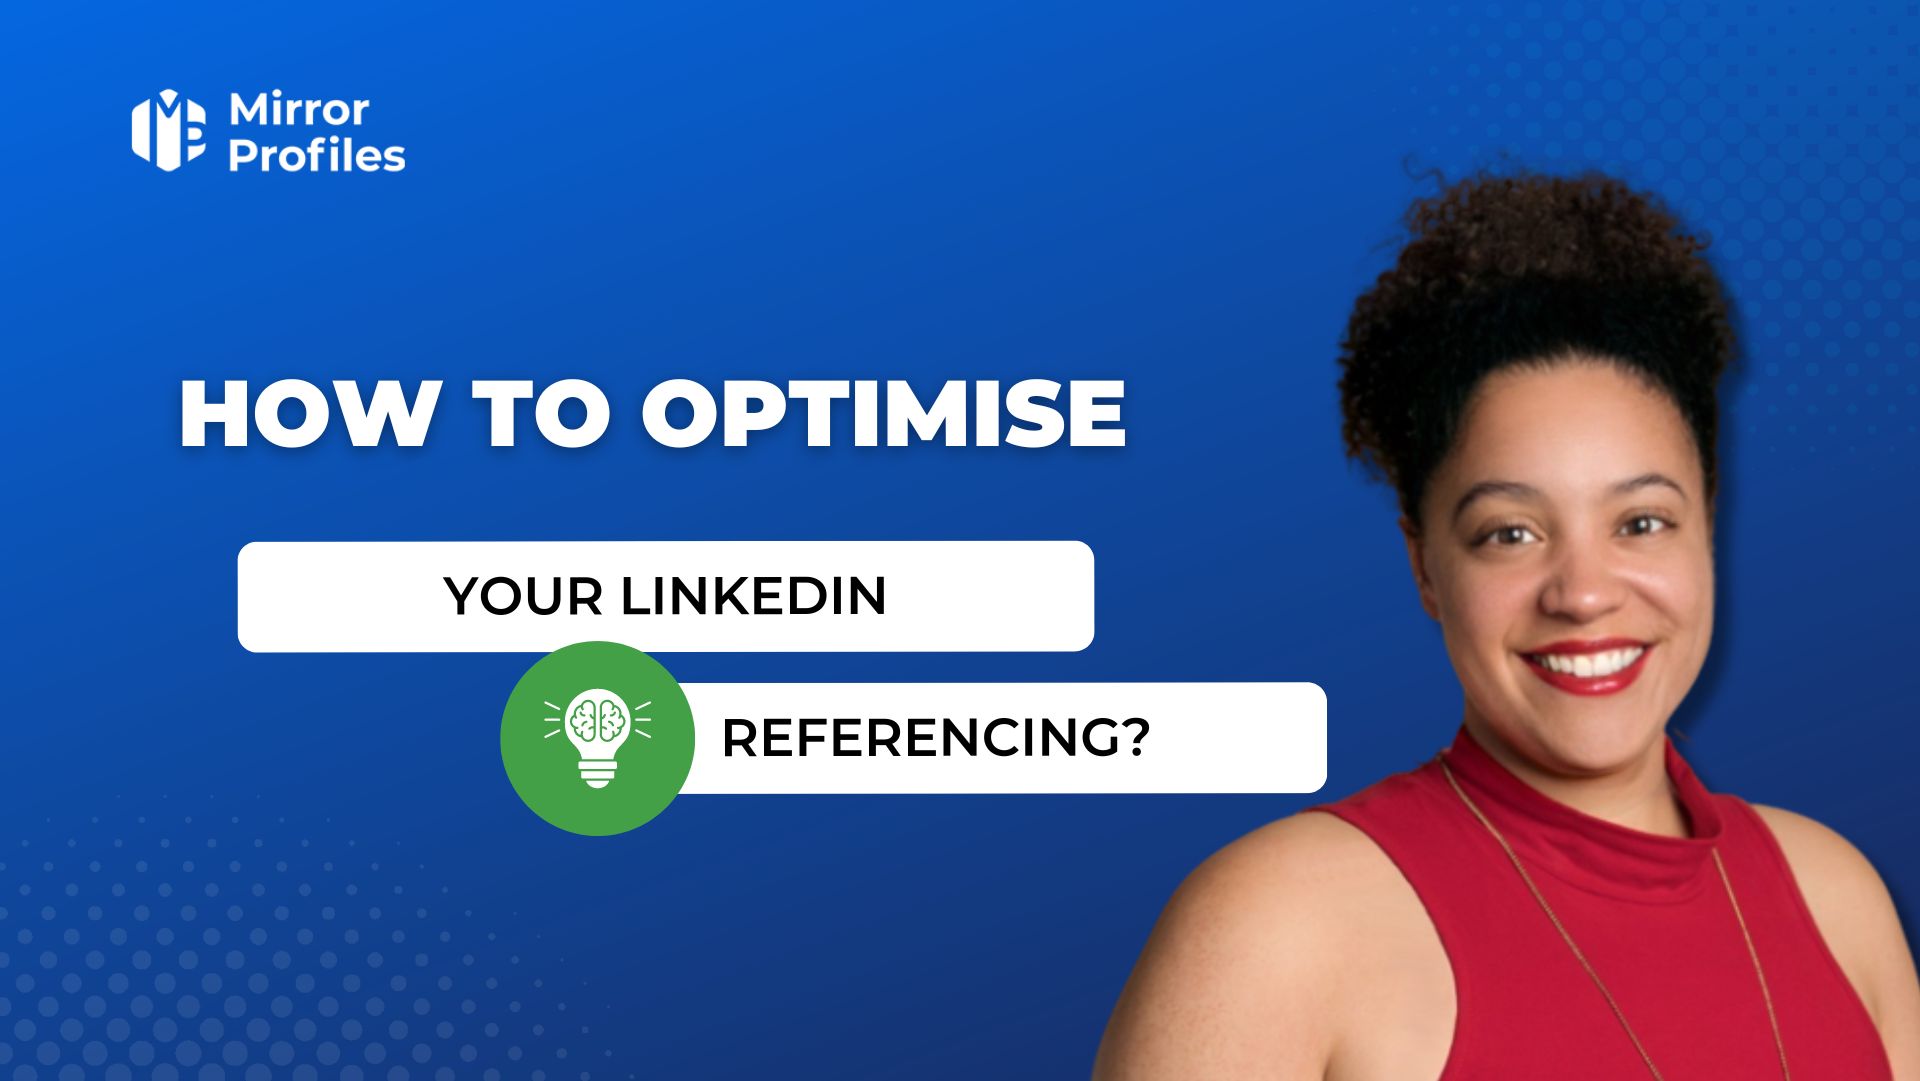 How to optimise your Linkedin referencing?